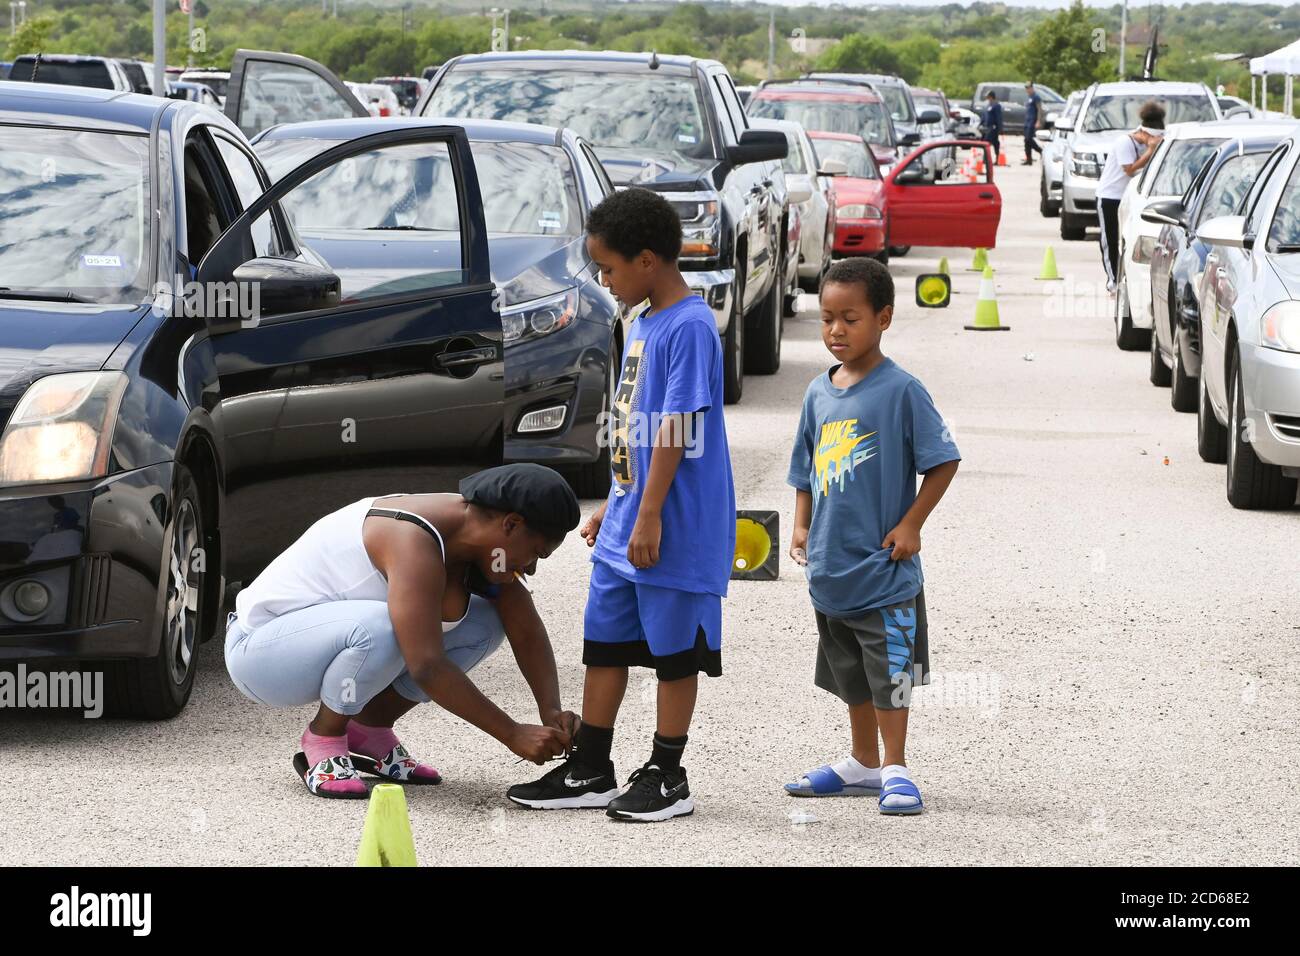 Austin, TX USA August 26, 2020: Hundreds of cars from coastal east Texas and southwest Louisiana wait in line at a Hurricane Laura evacuation center at the Circuit of the Americas race track. After spending hours in their family car, this woman and kids finally get some fresh air. Early-arriving drivers received vouchers for hotel rooms. Once those ran out, drivers were directed to other evacuation centers in Waco and Dallas. Laura is expected to make landfall overnight as a Category 4 storm and wreak havoc along the Texas and Louisiana coasts and inland. Credit: Bob Daemmrich/Ala Stock Photo